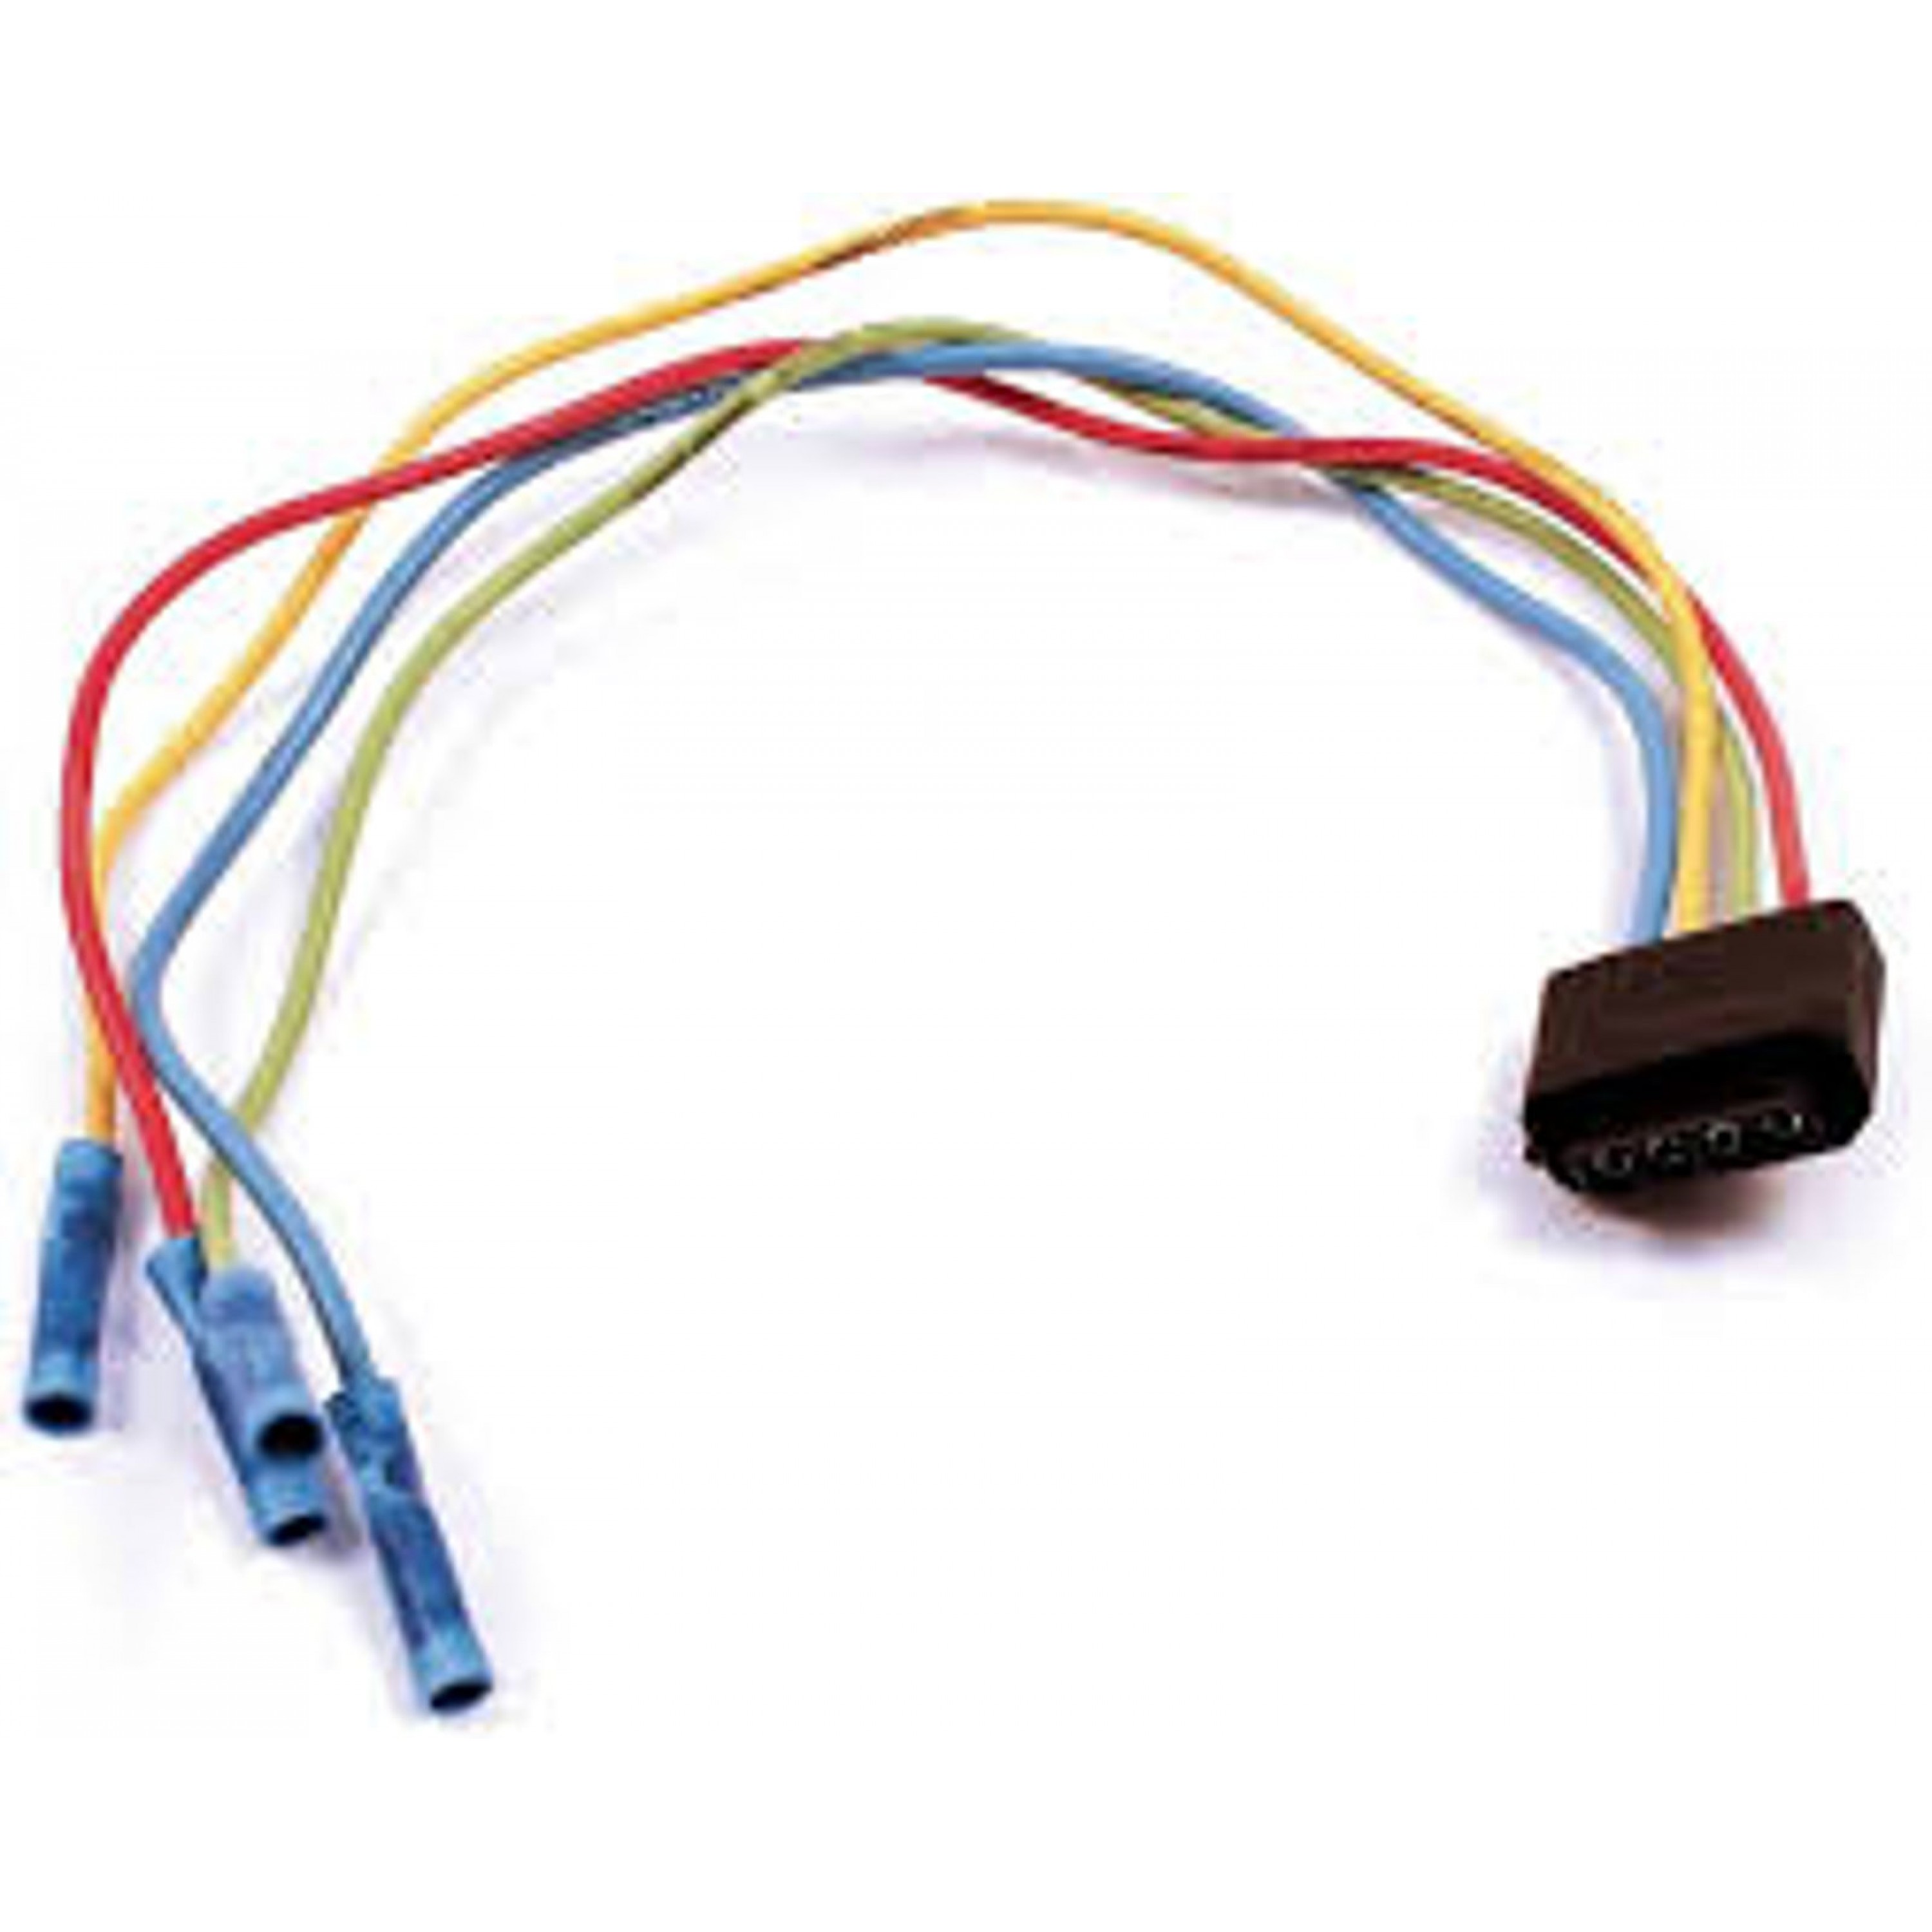 BENNETT PIGTAIL FOR WIRE HARNESS